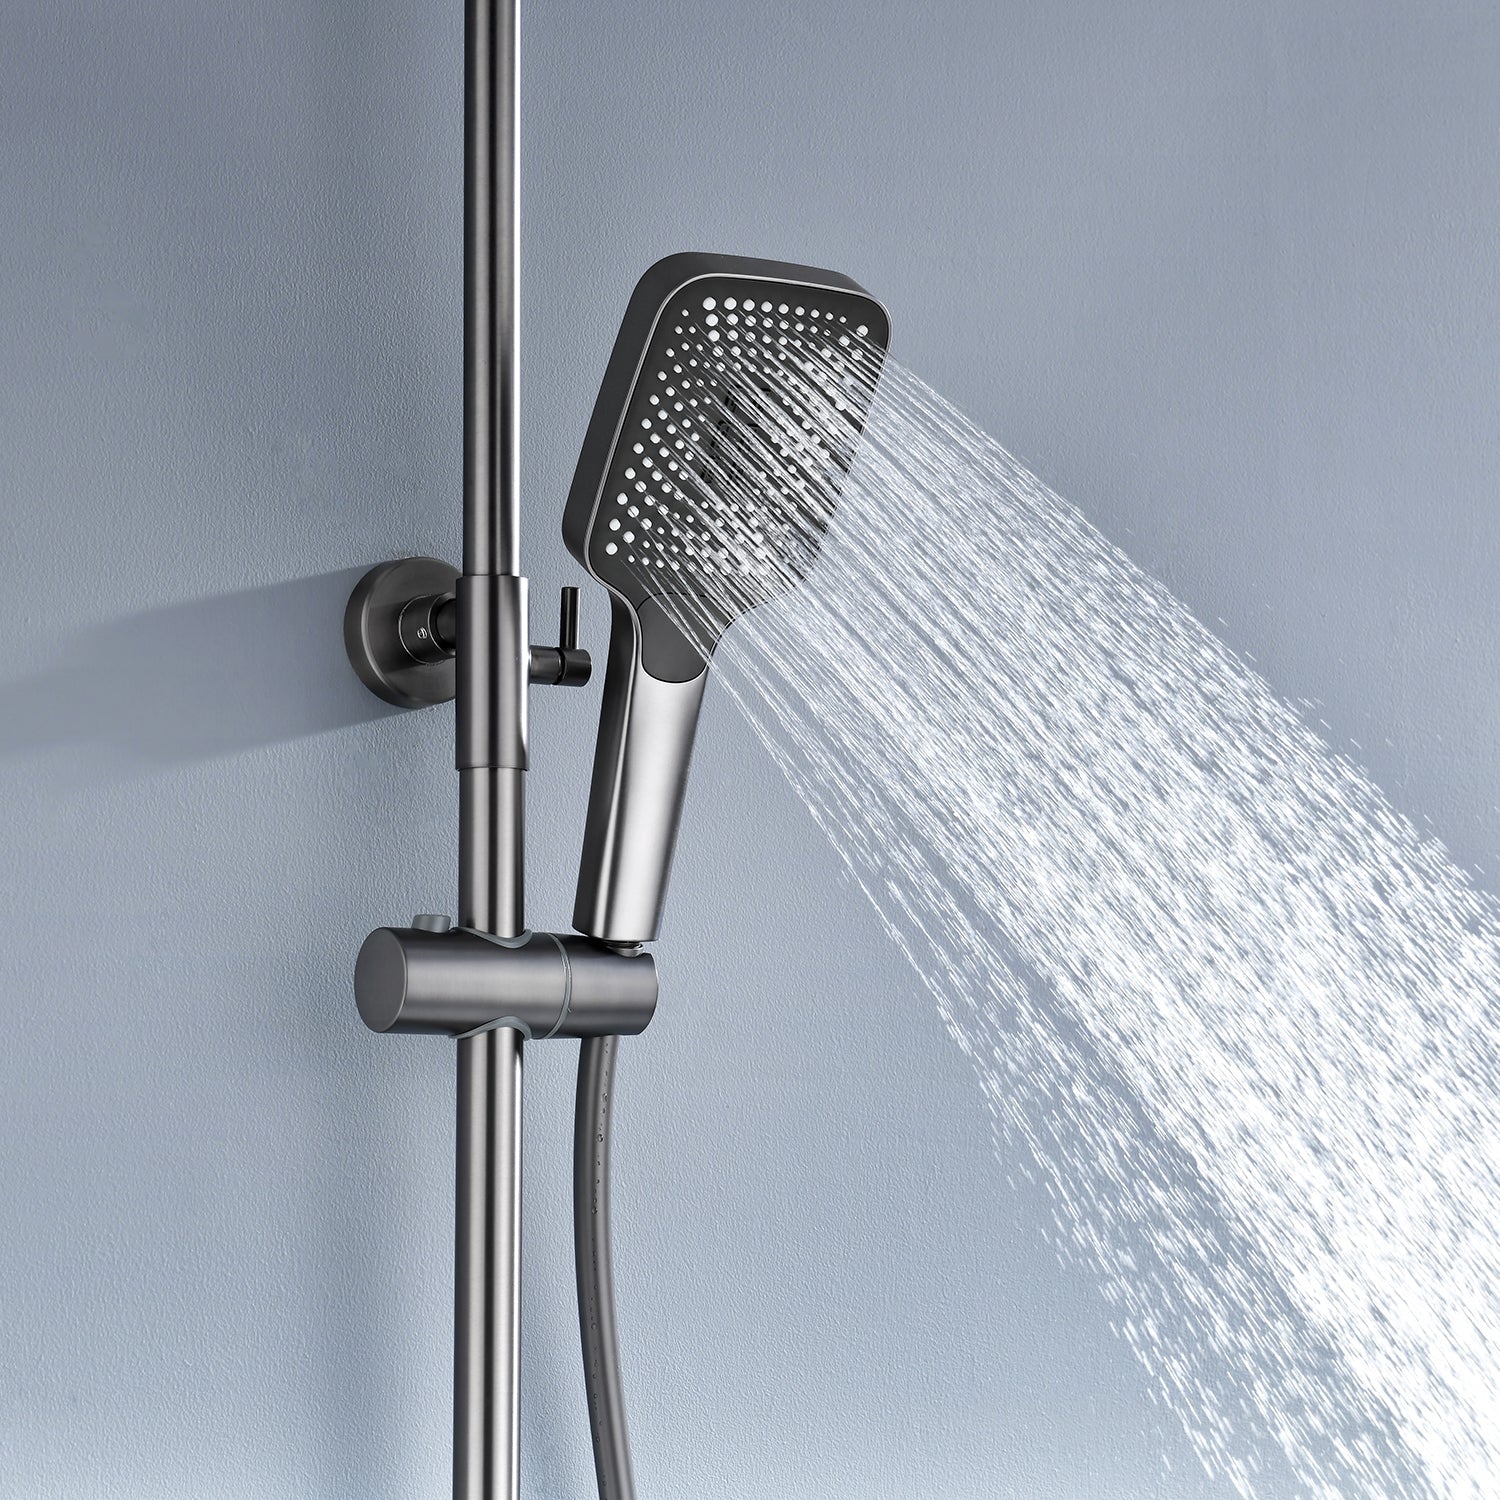 Lefton Digital Shower System with Temperature Display and 4 Water Outlet Modes-SST2205